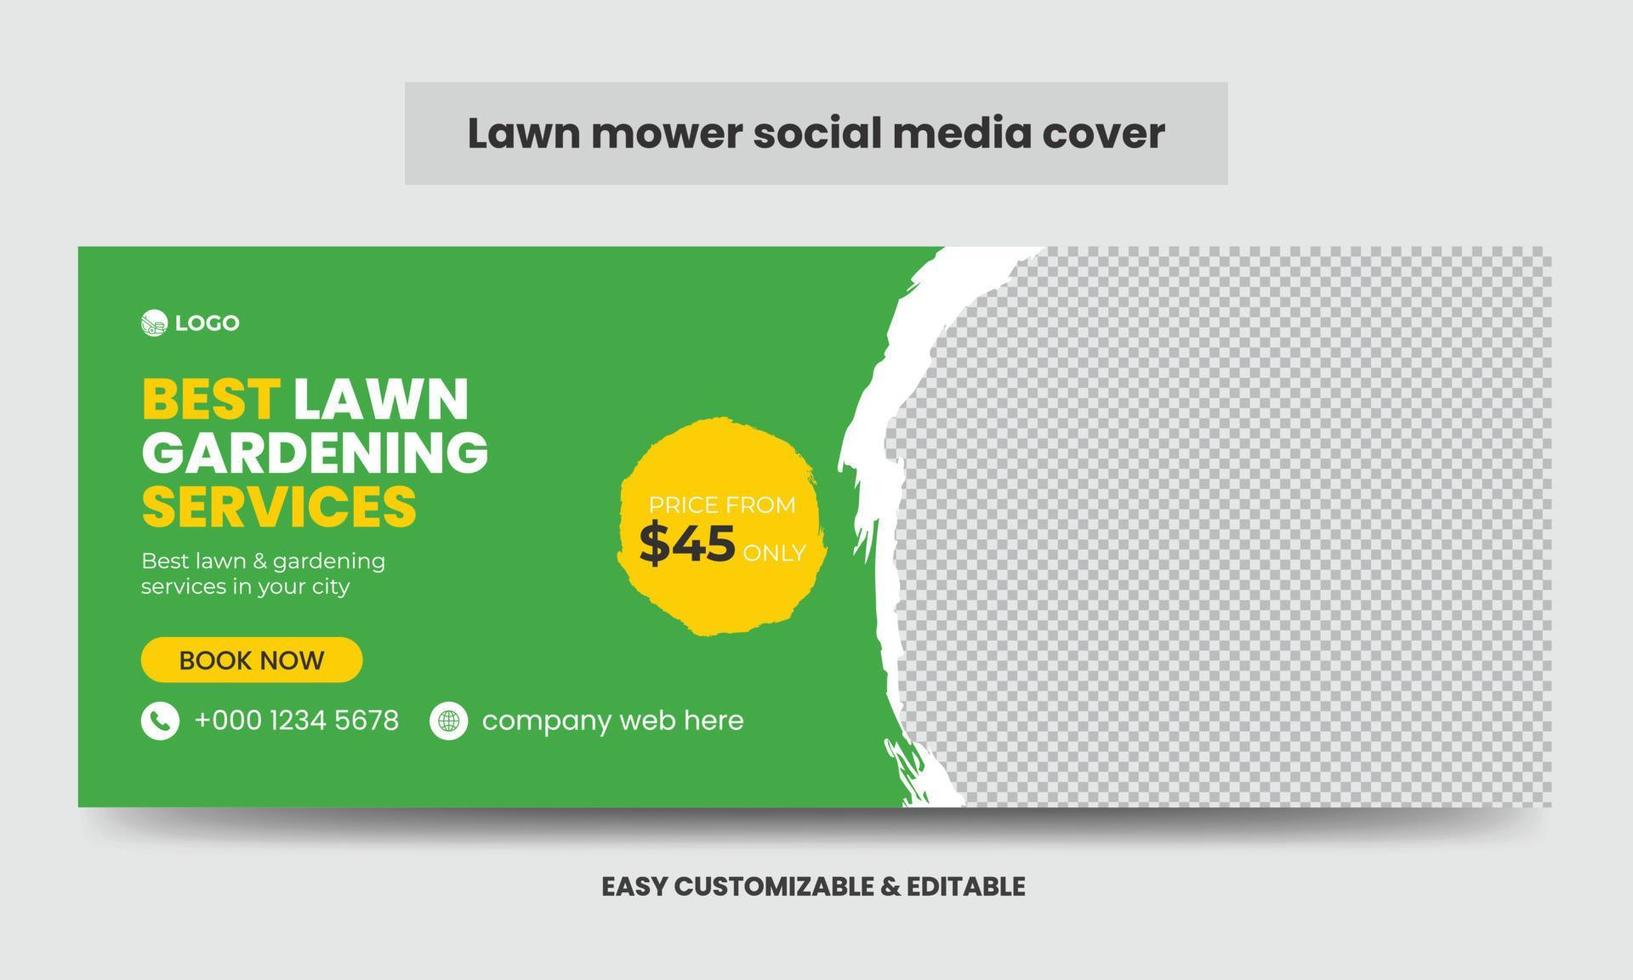 Lawn mower Promotion Social Media Cover Photo Design Template. Mowing Service Social Media Timeline Web Banner vector